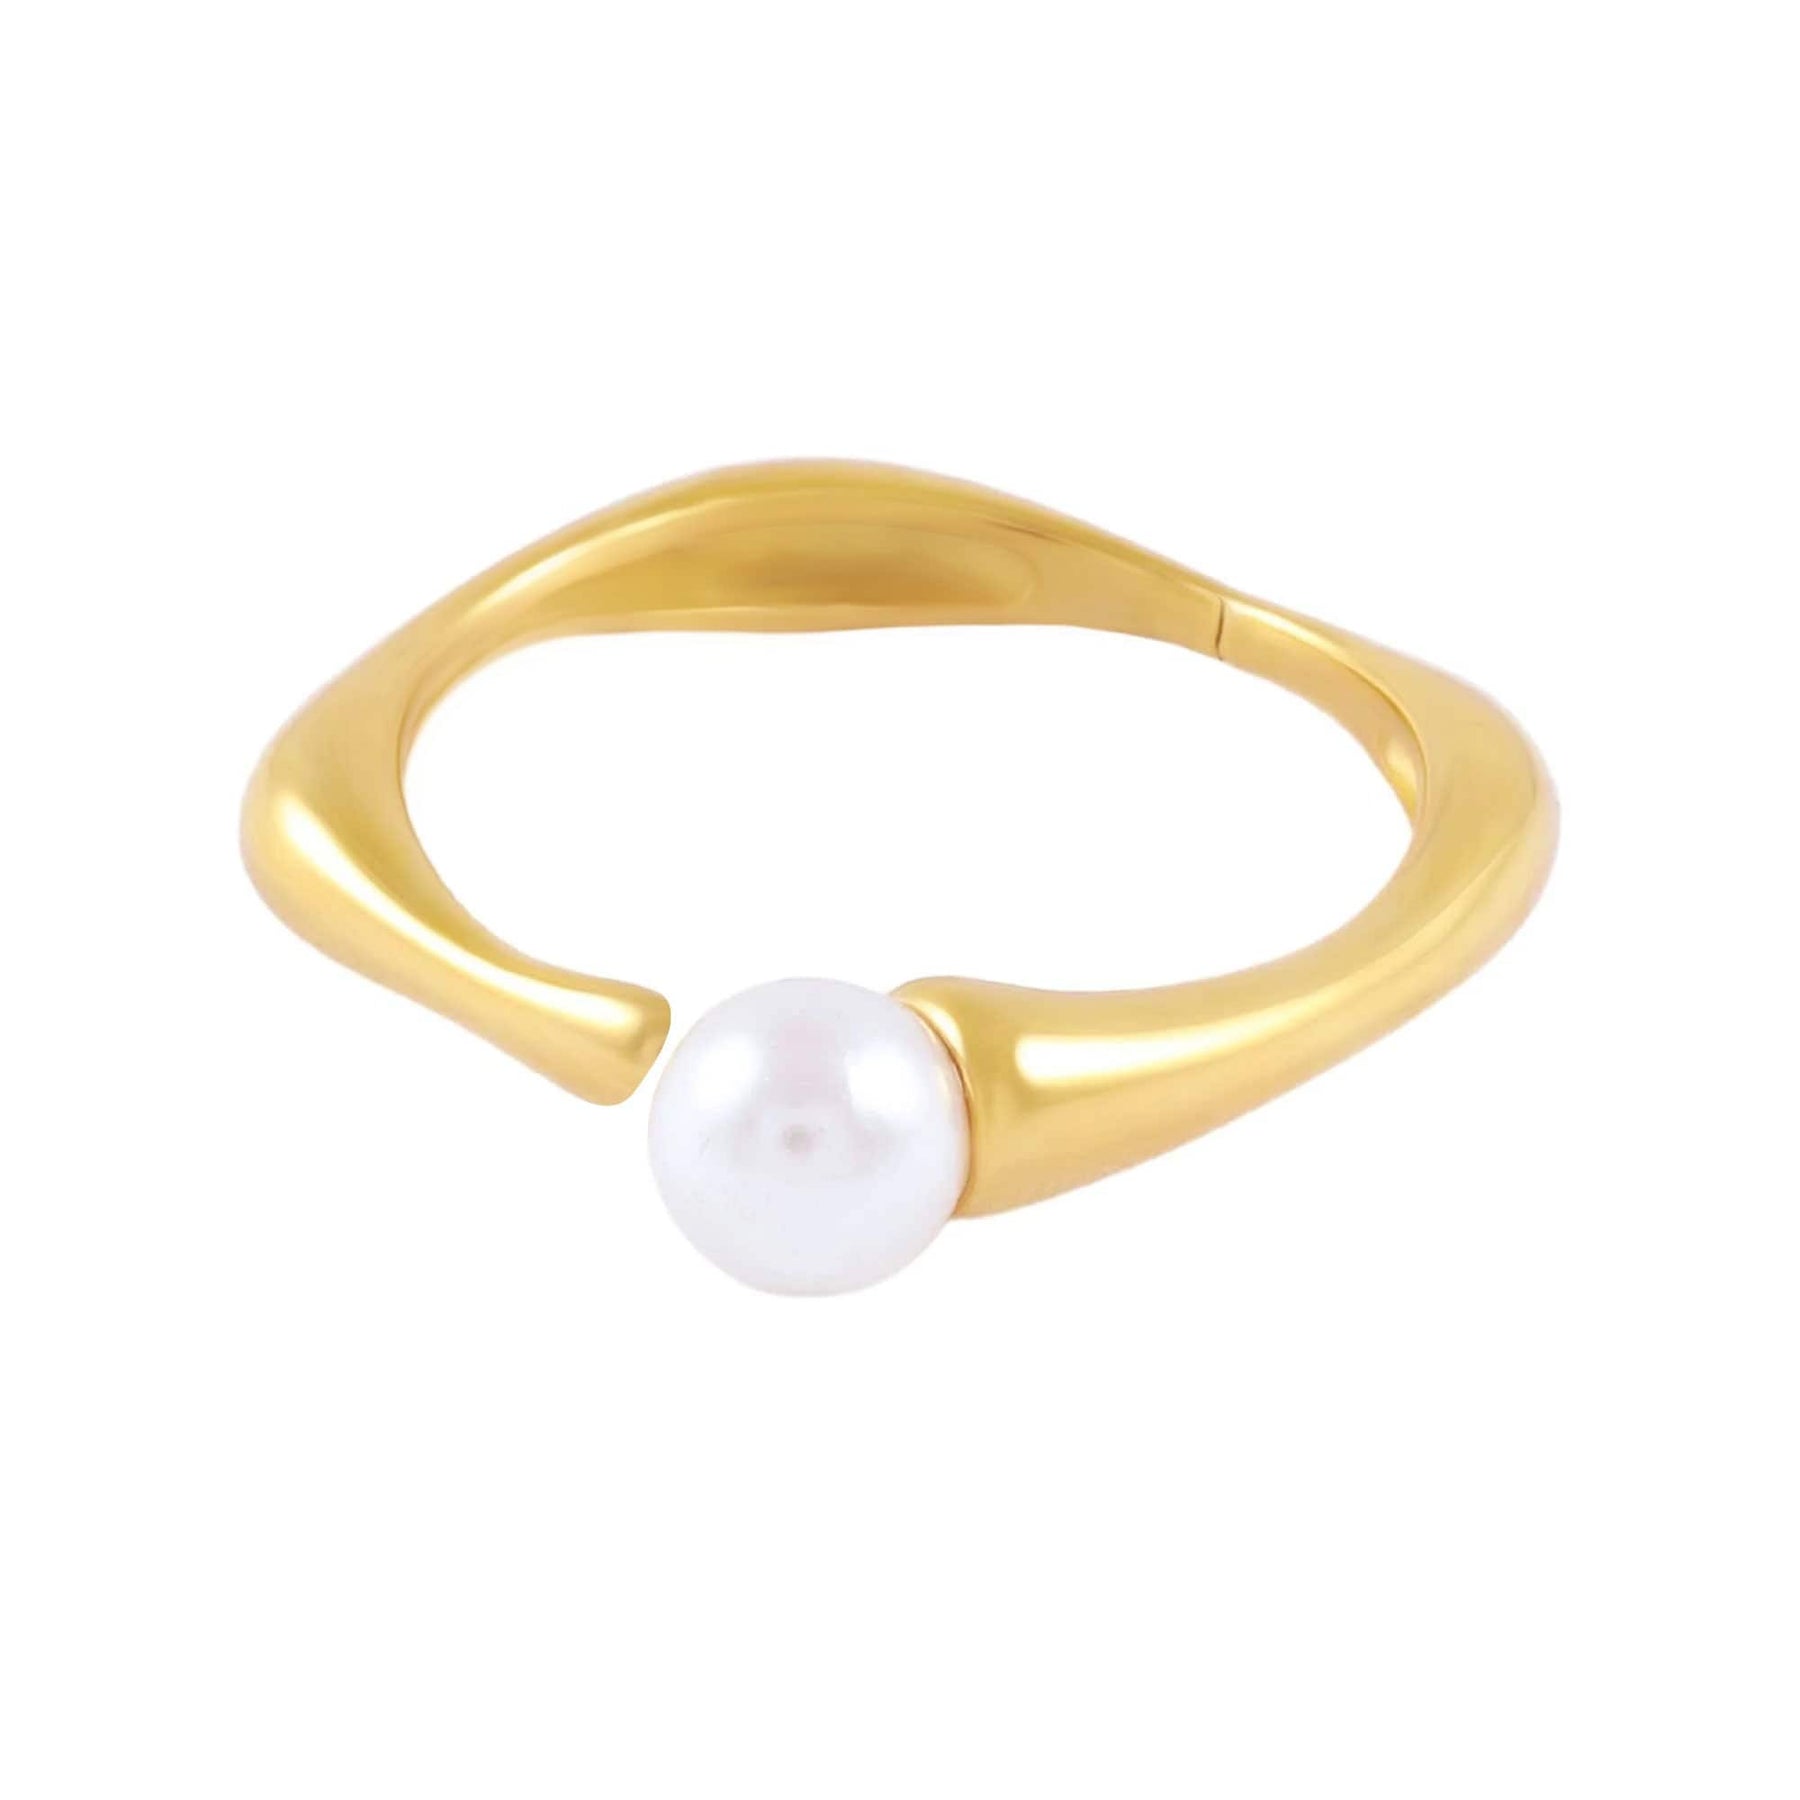 BohoMoon Stainless Steel Cleo Pearl Ring Gold / US 6 / UK L / EUR 51 (small)